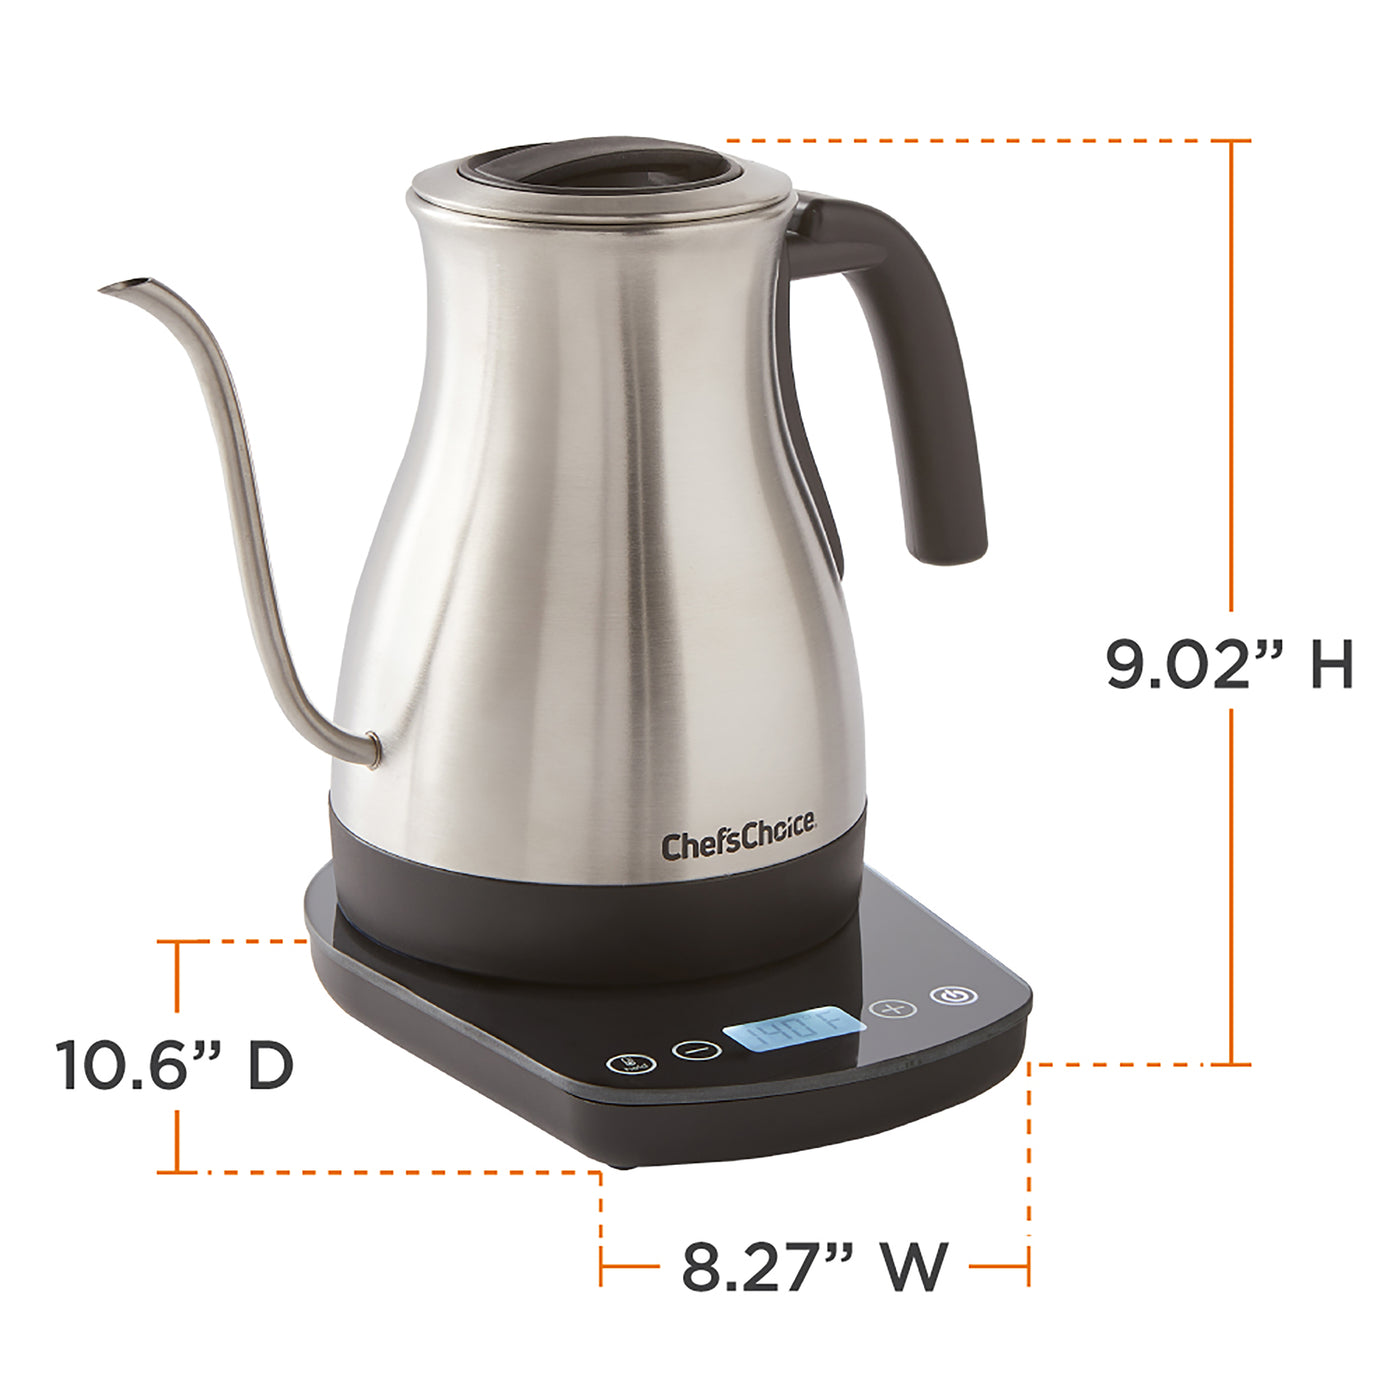 The Chef'sChoice Gooseneck Pour Over Electric Kettle boils water to the  exact degree faster than a microwave or stovetop. The unique gooseneck  spout allows for predictable accurate pouring when used for a